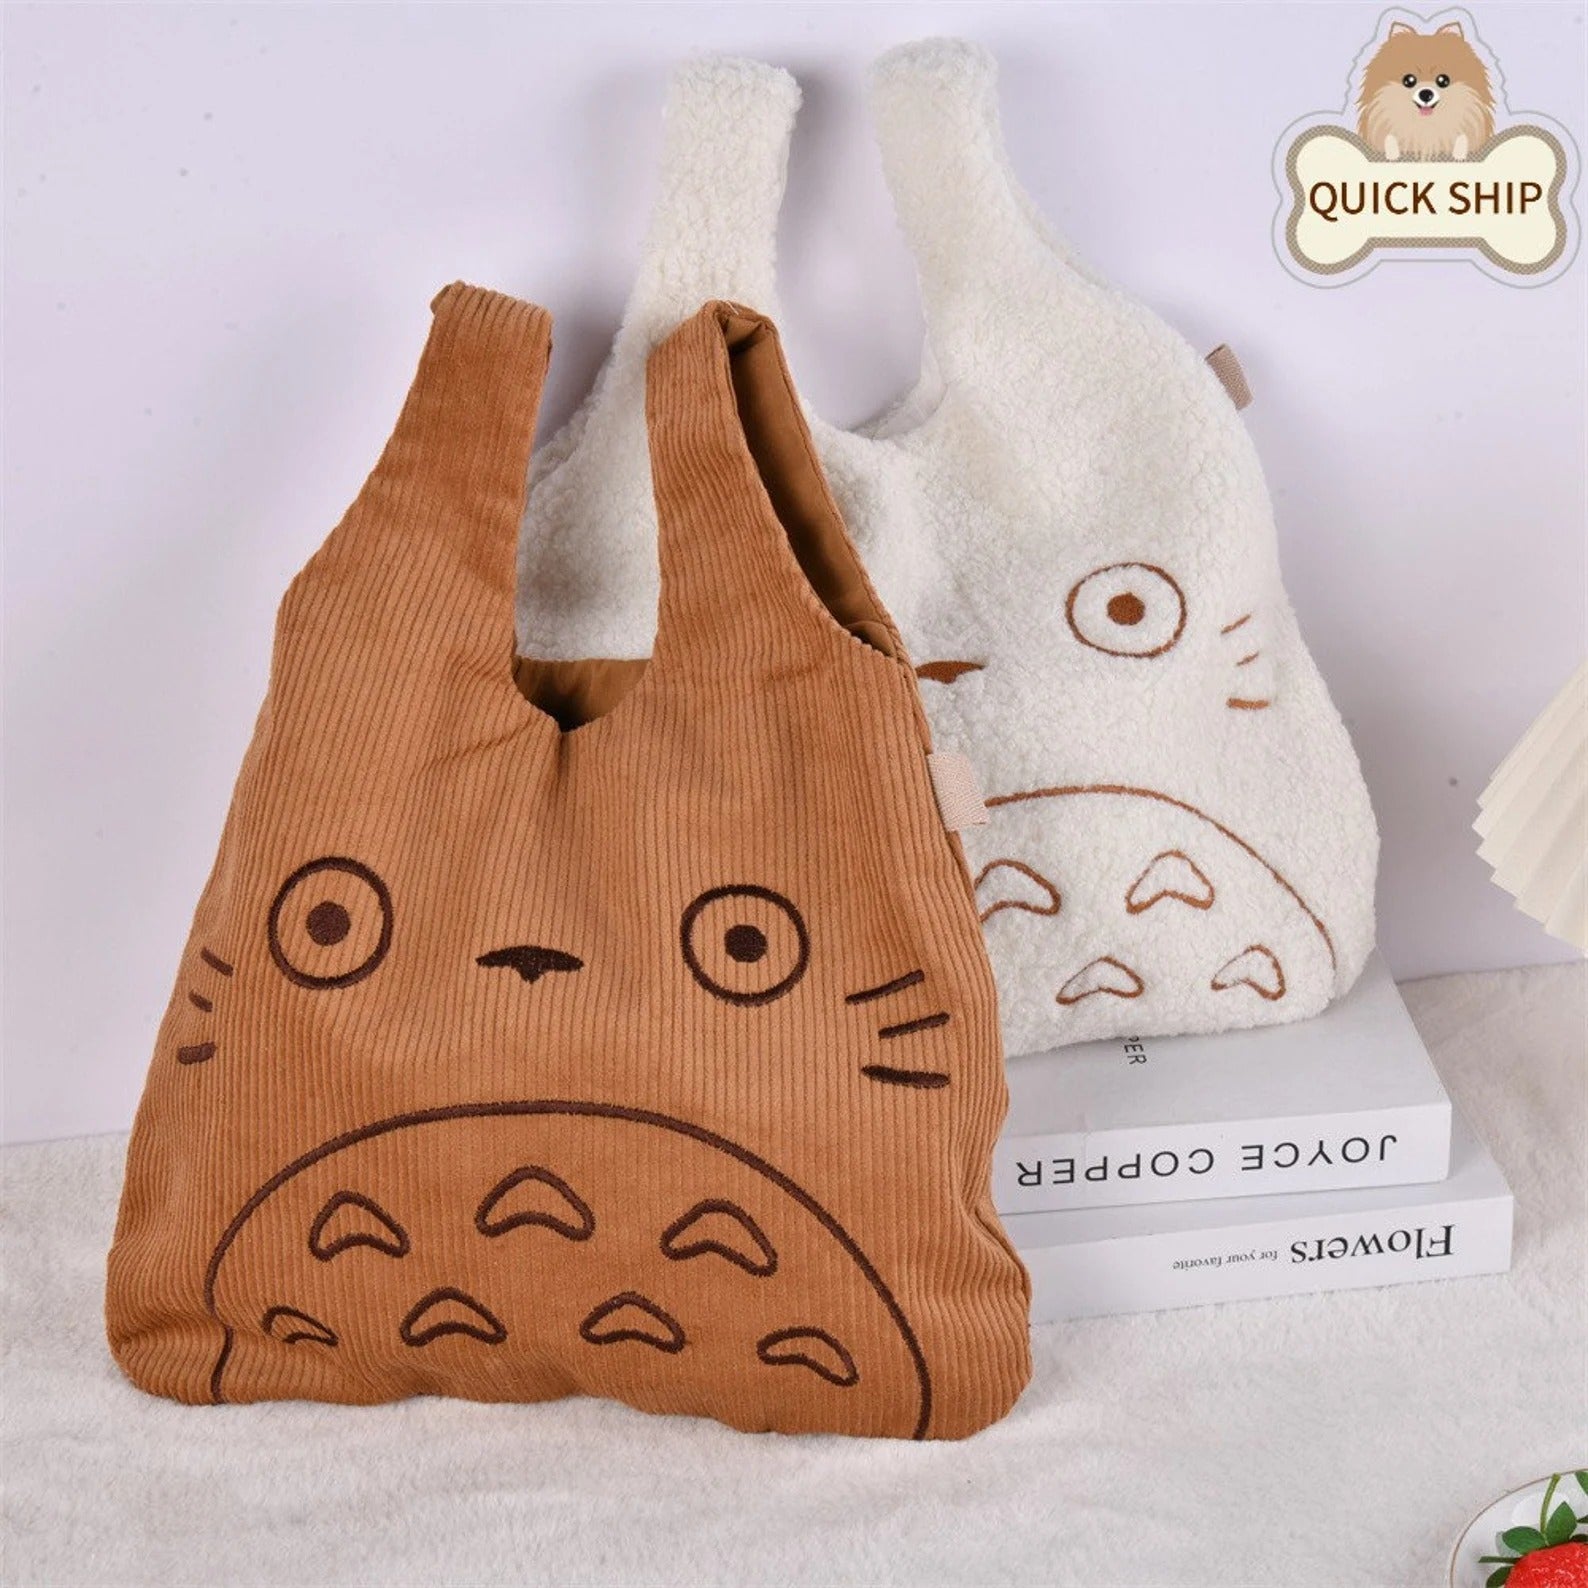 two totoro hand bags